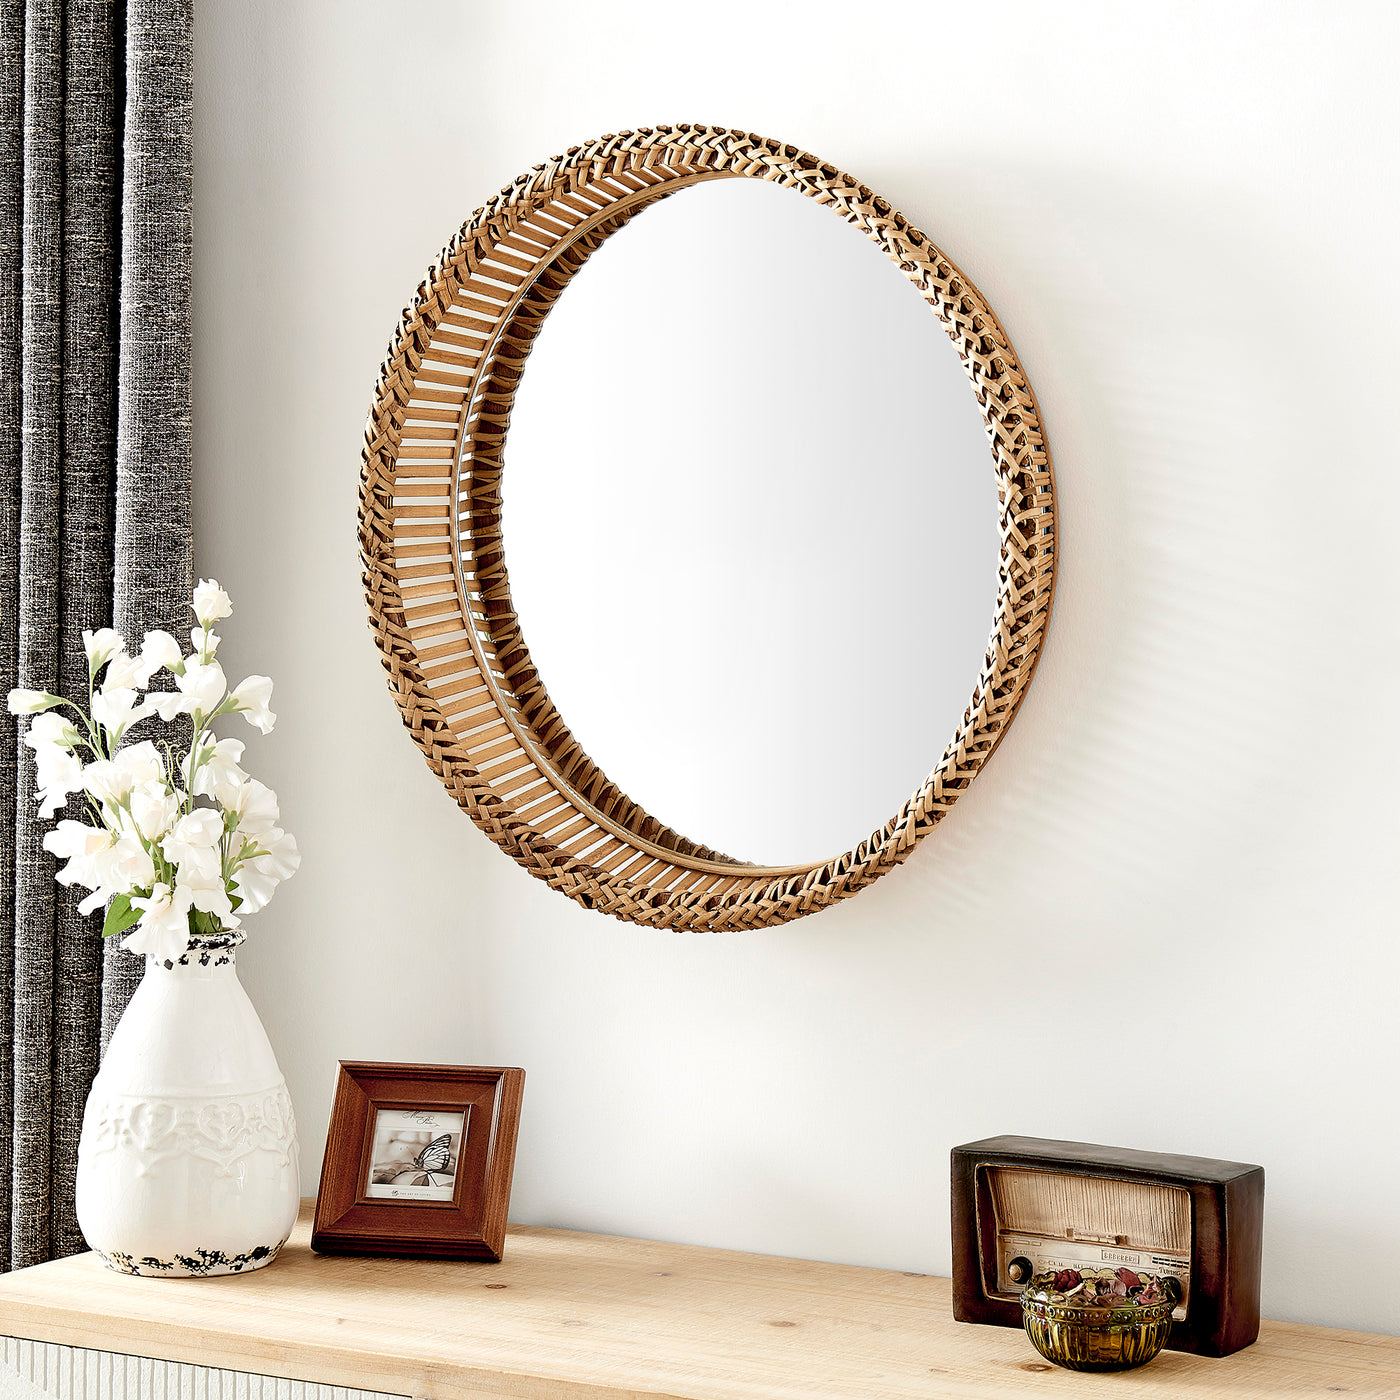 FirsTime & Co. Natural Waverly Rattan Wall Mirror, Bohemian Style, Made of Rattan